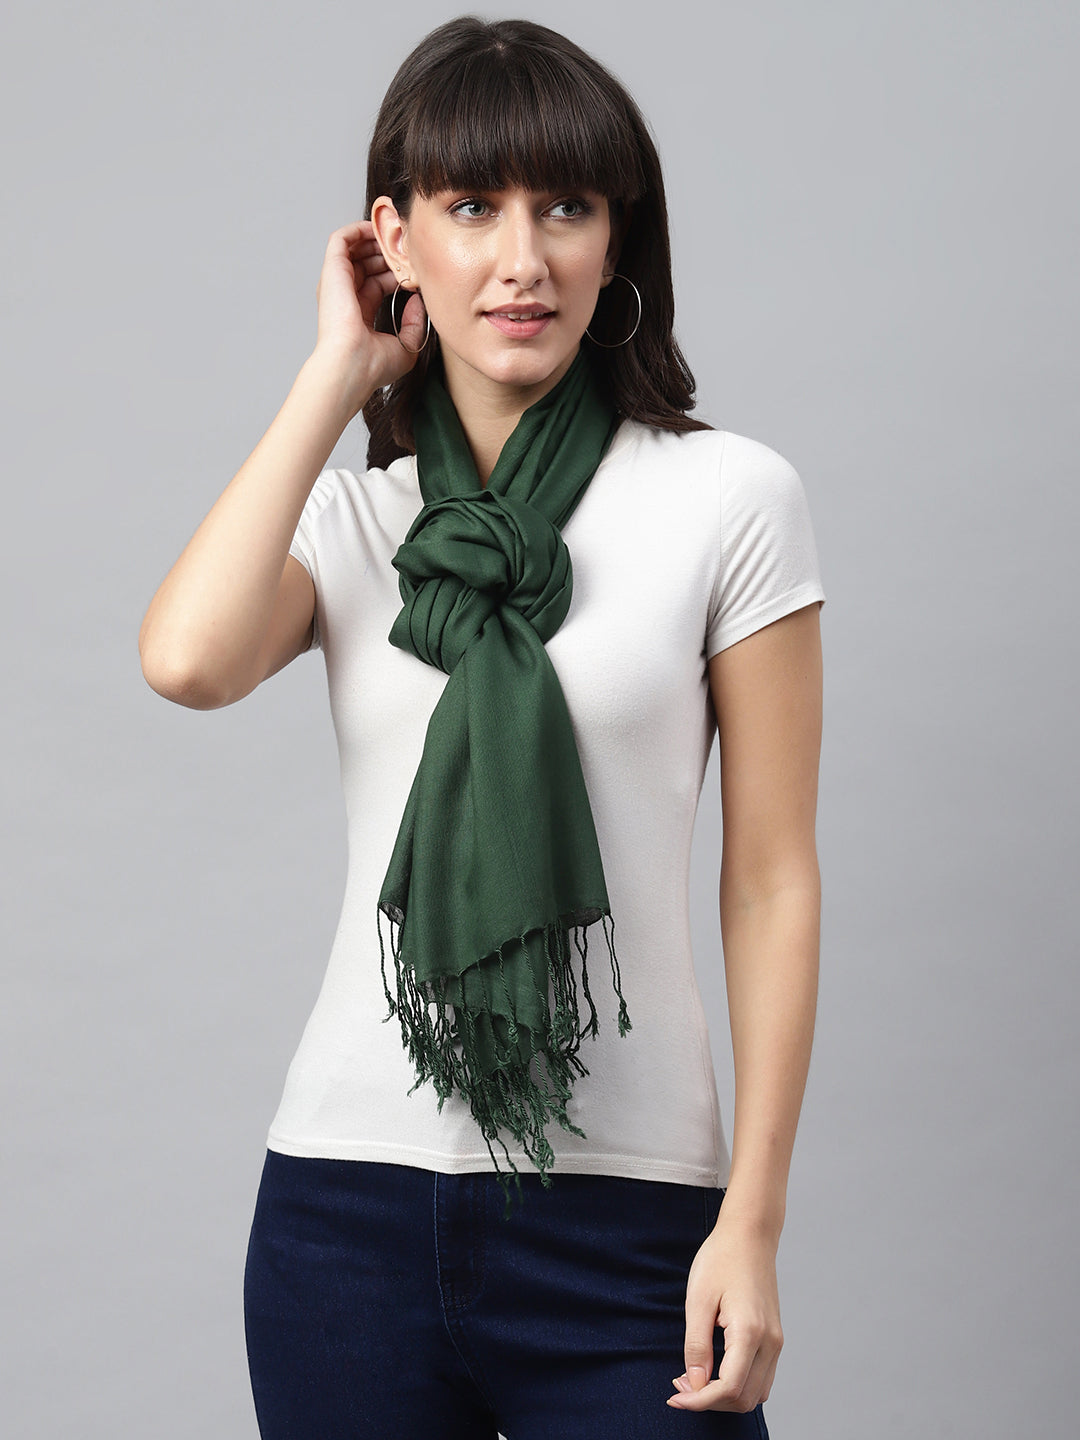 Bottle Green Rayon Solid Unisex Stole